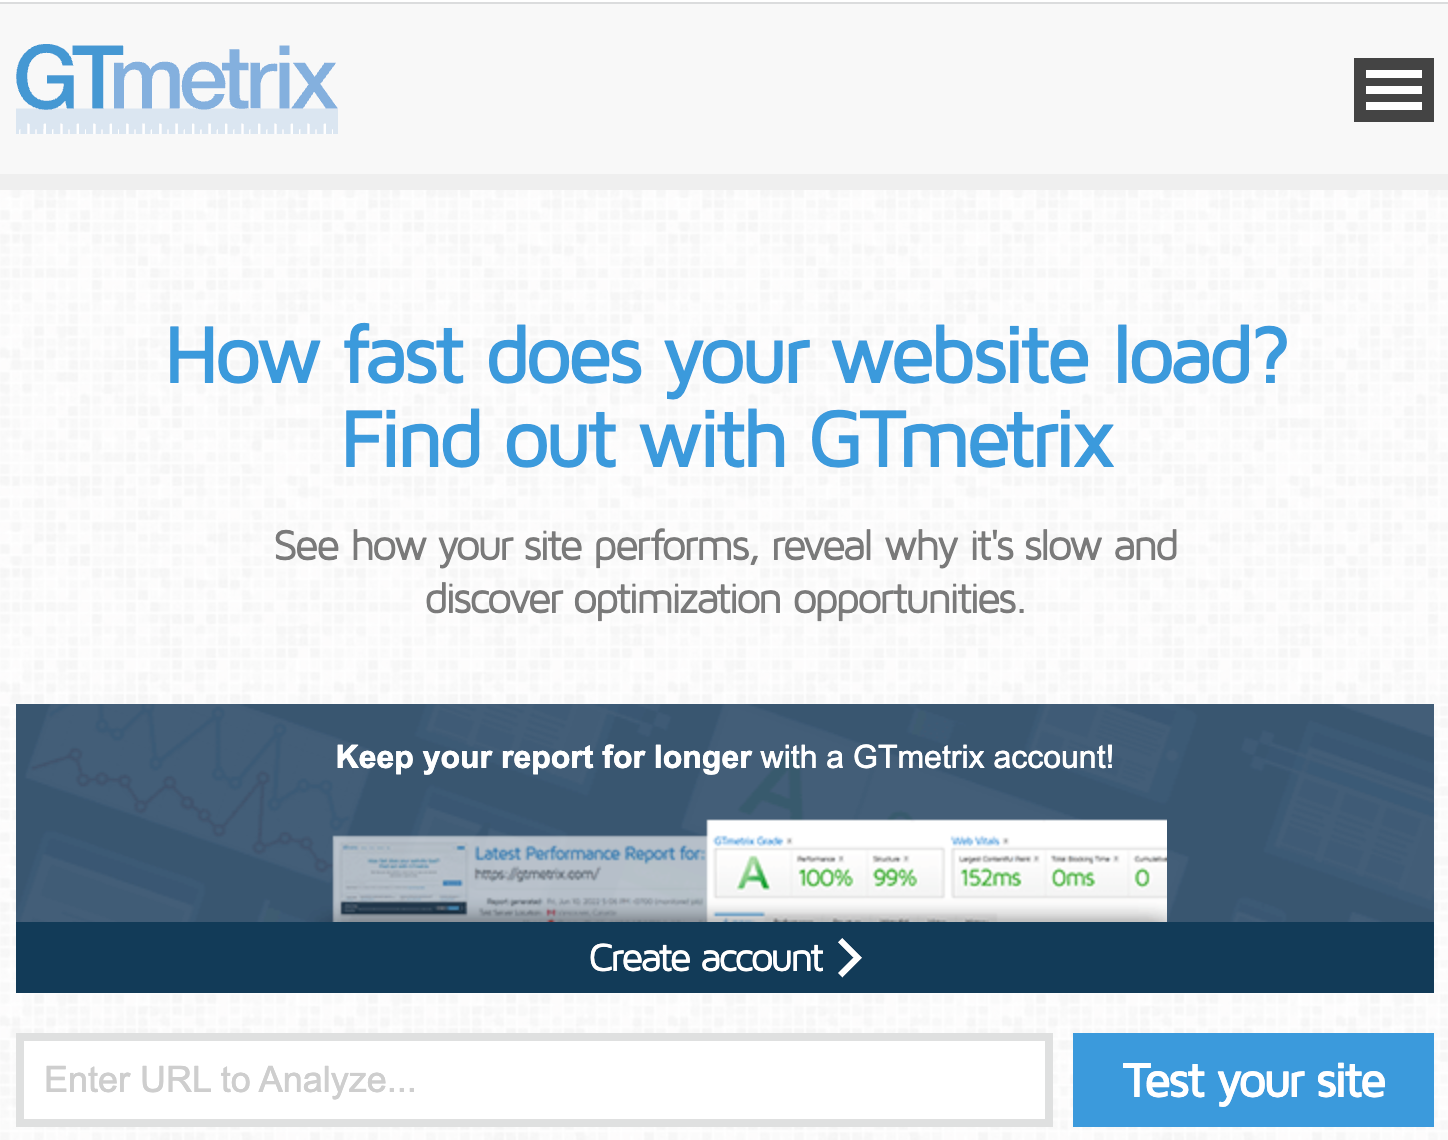 How to Use the GTmetrix Speed Test to Improve PageSpeed Score